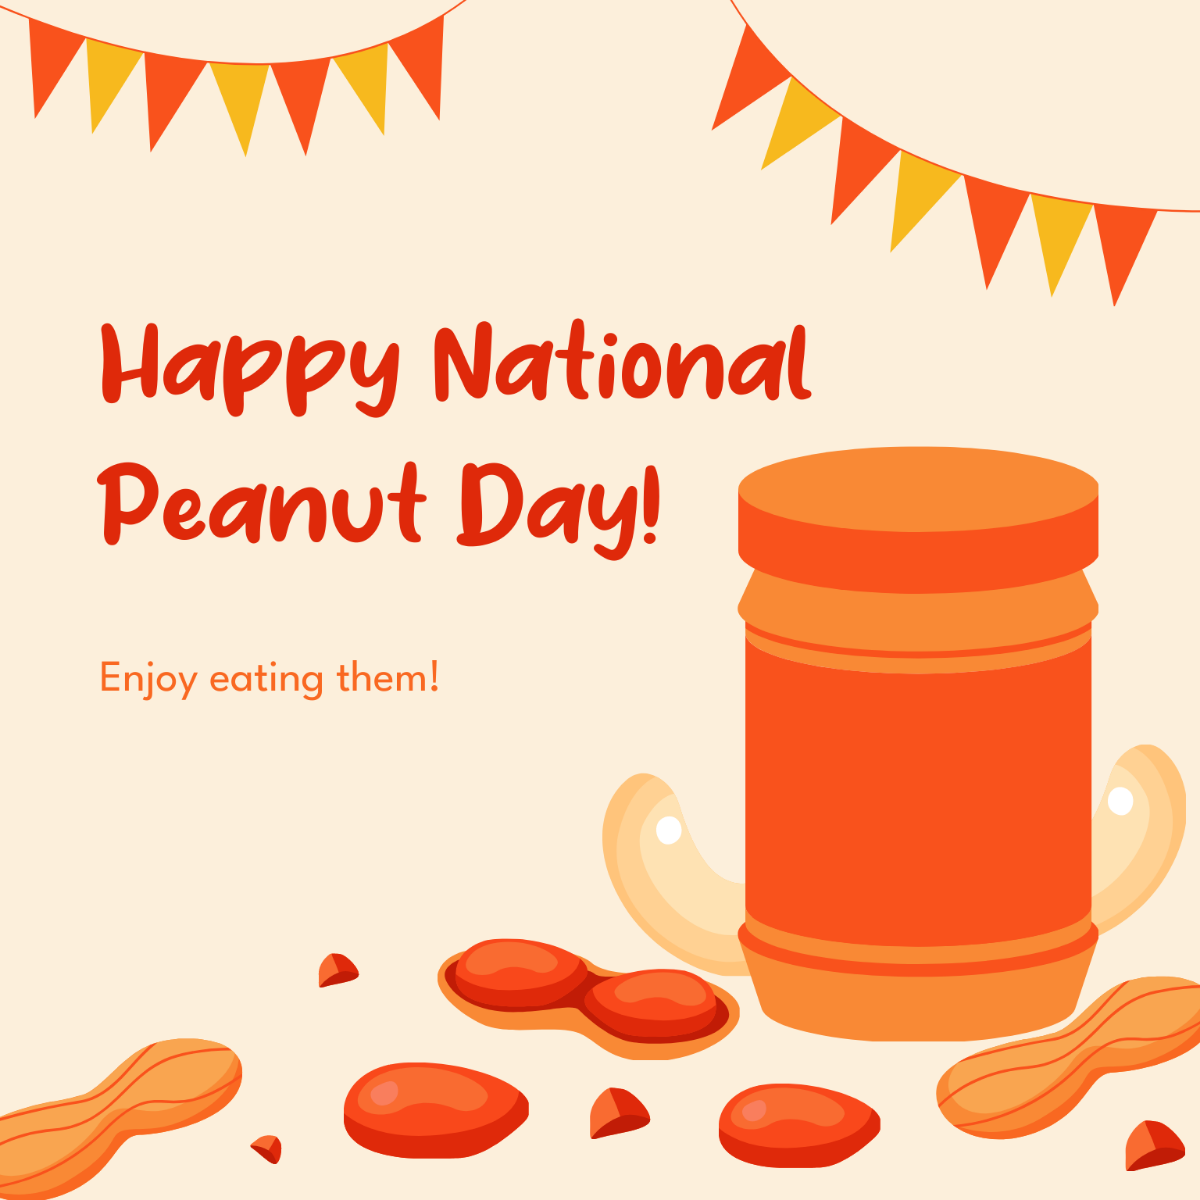 National Peanut Day Poster Vector Template